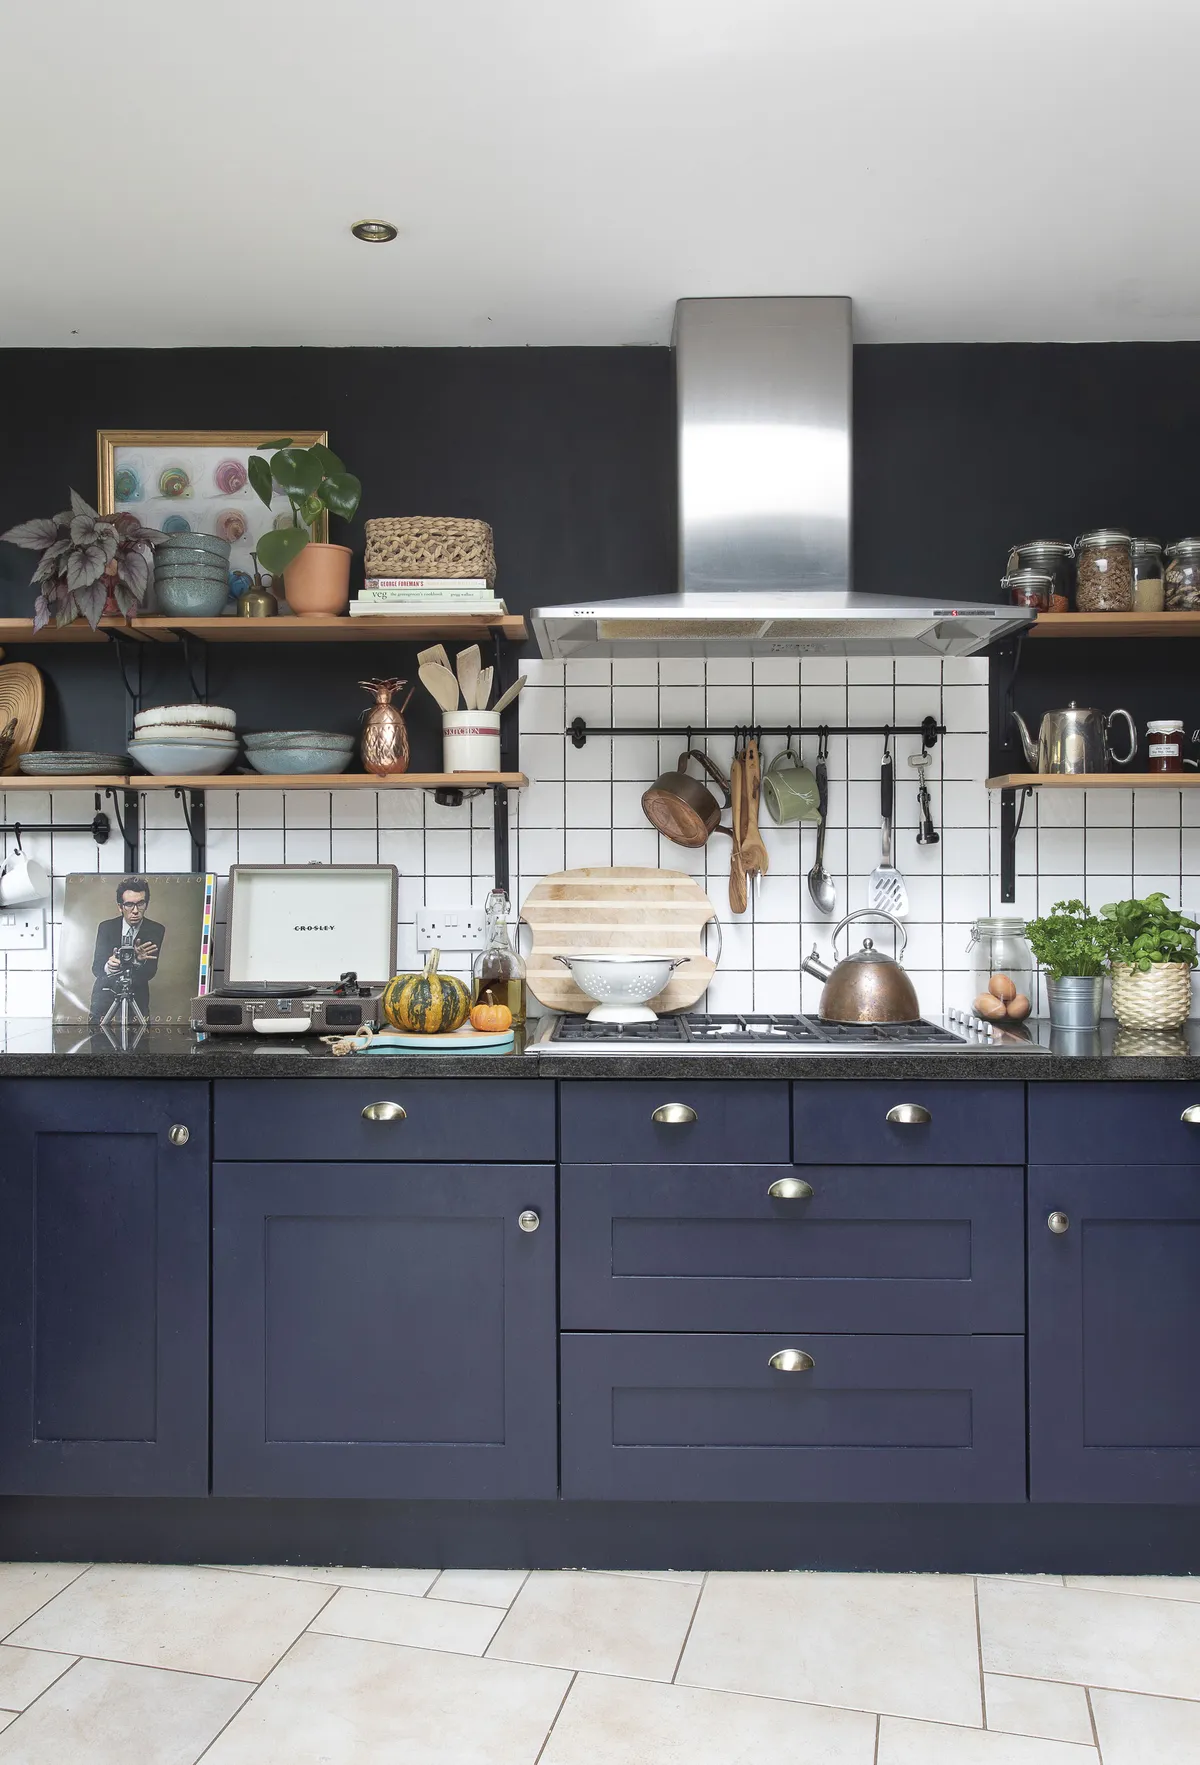 The cabinets were already here, and Eniko gave them a new look by painting them in Marine Blue by Little Greene. The dark brown walls are painted in Mole emulsion by Abigail Ahern. ‘I removed the wall cabinets and replaced them with open shelving. Blackboard walls are great for styling up Instagram moments!’